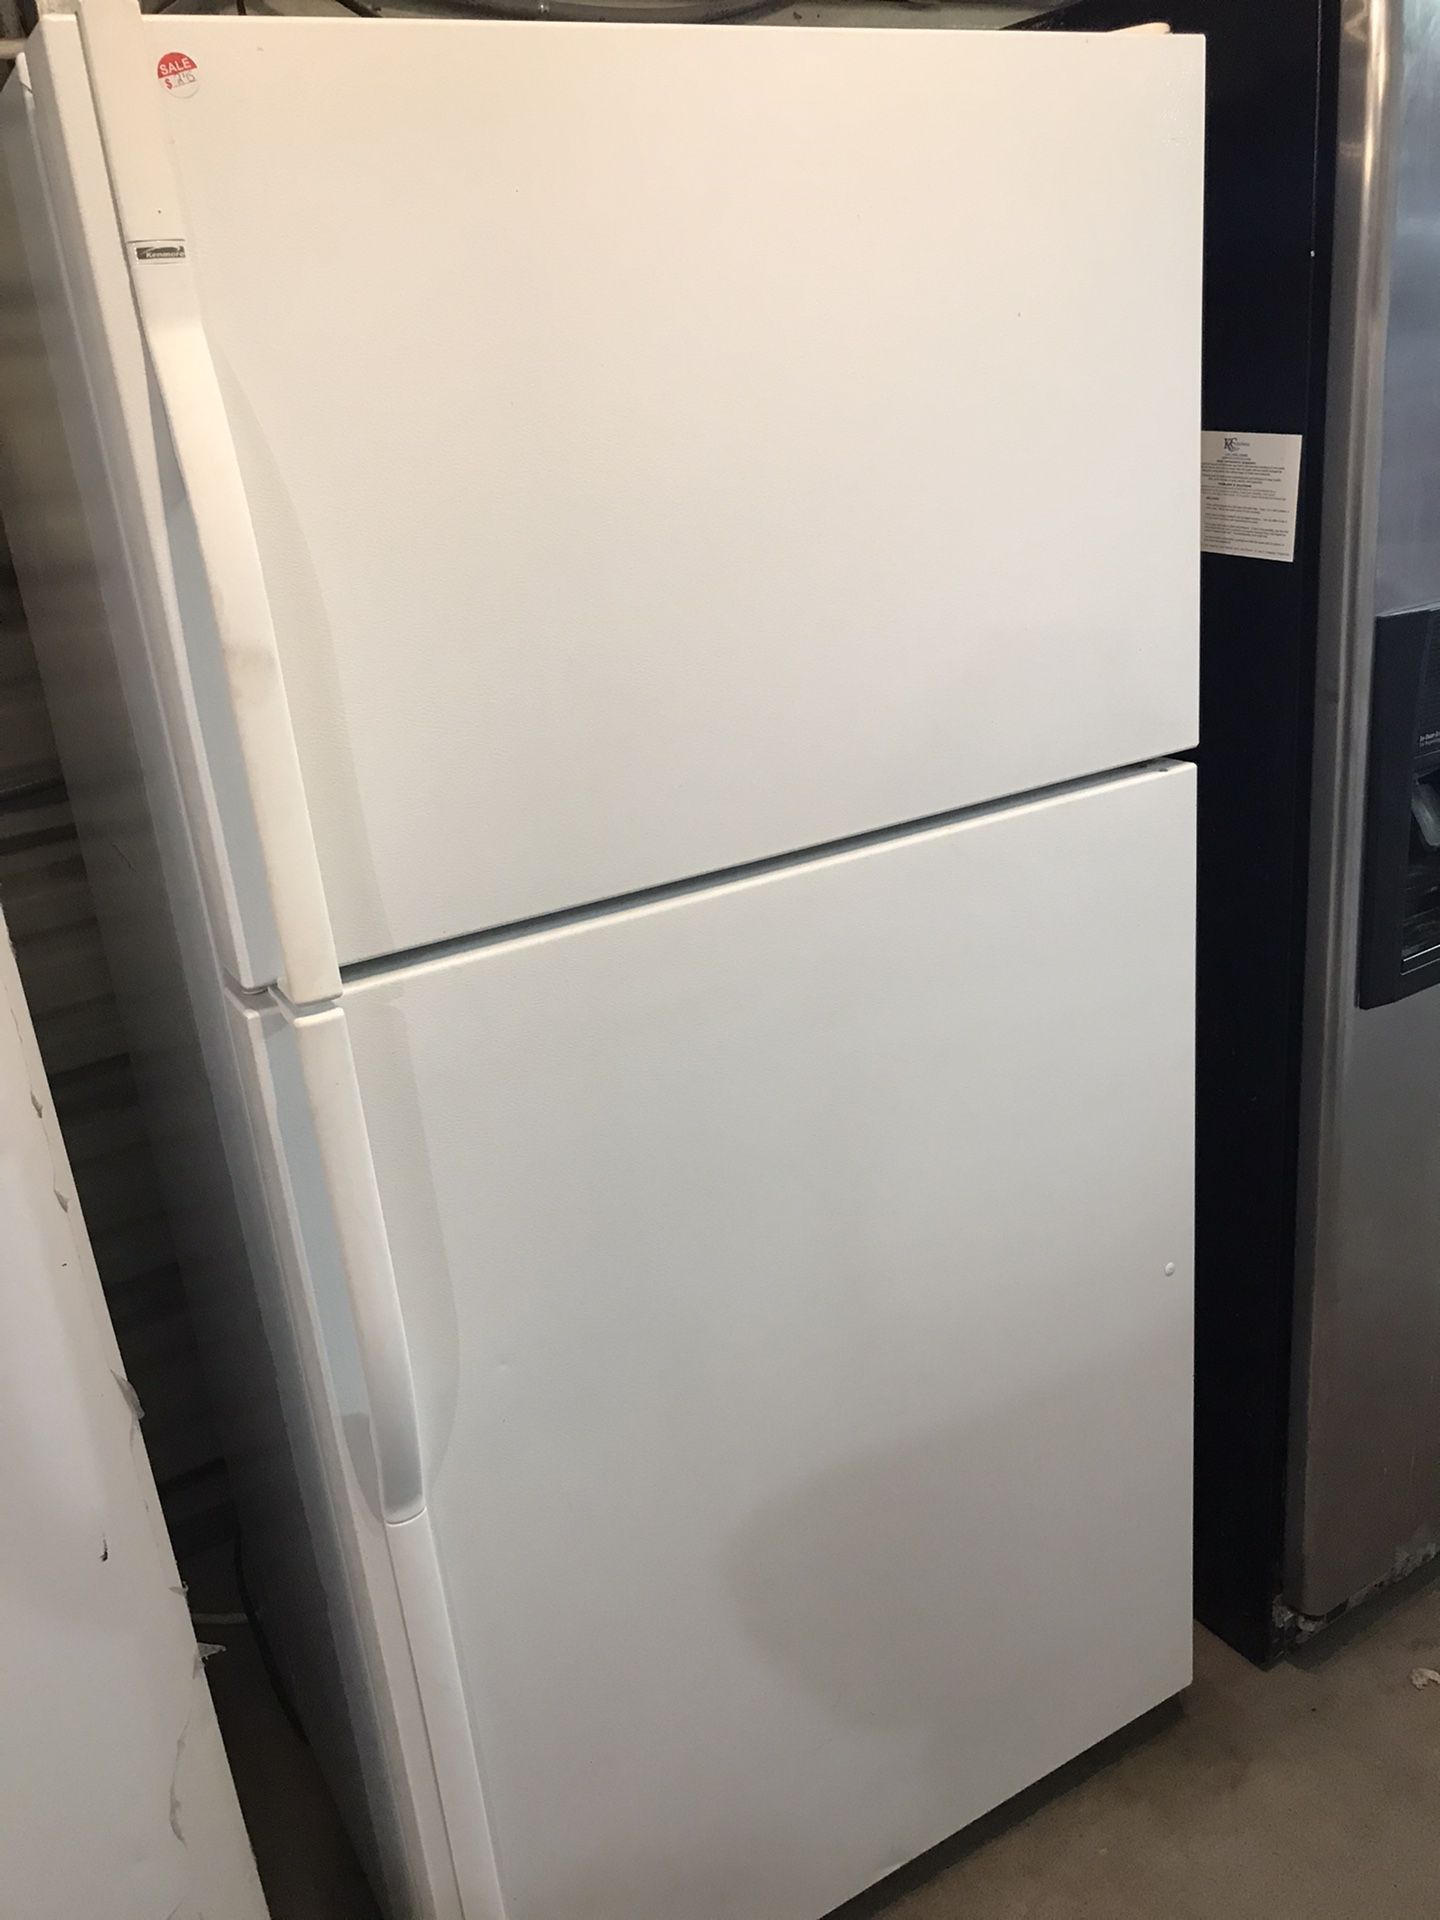 Kenmore refrigerator white color top freezer bottom refrigerator with a 90 day warranty we finance